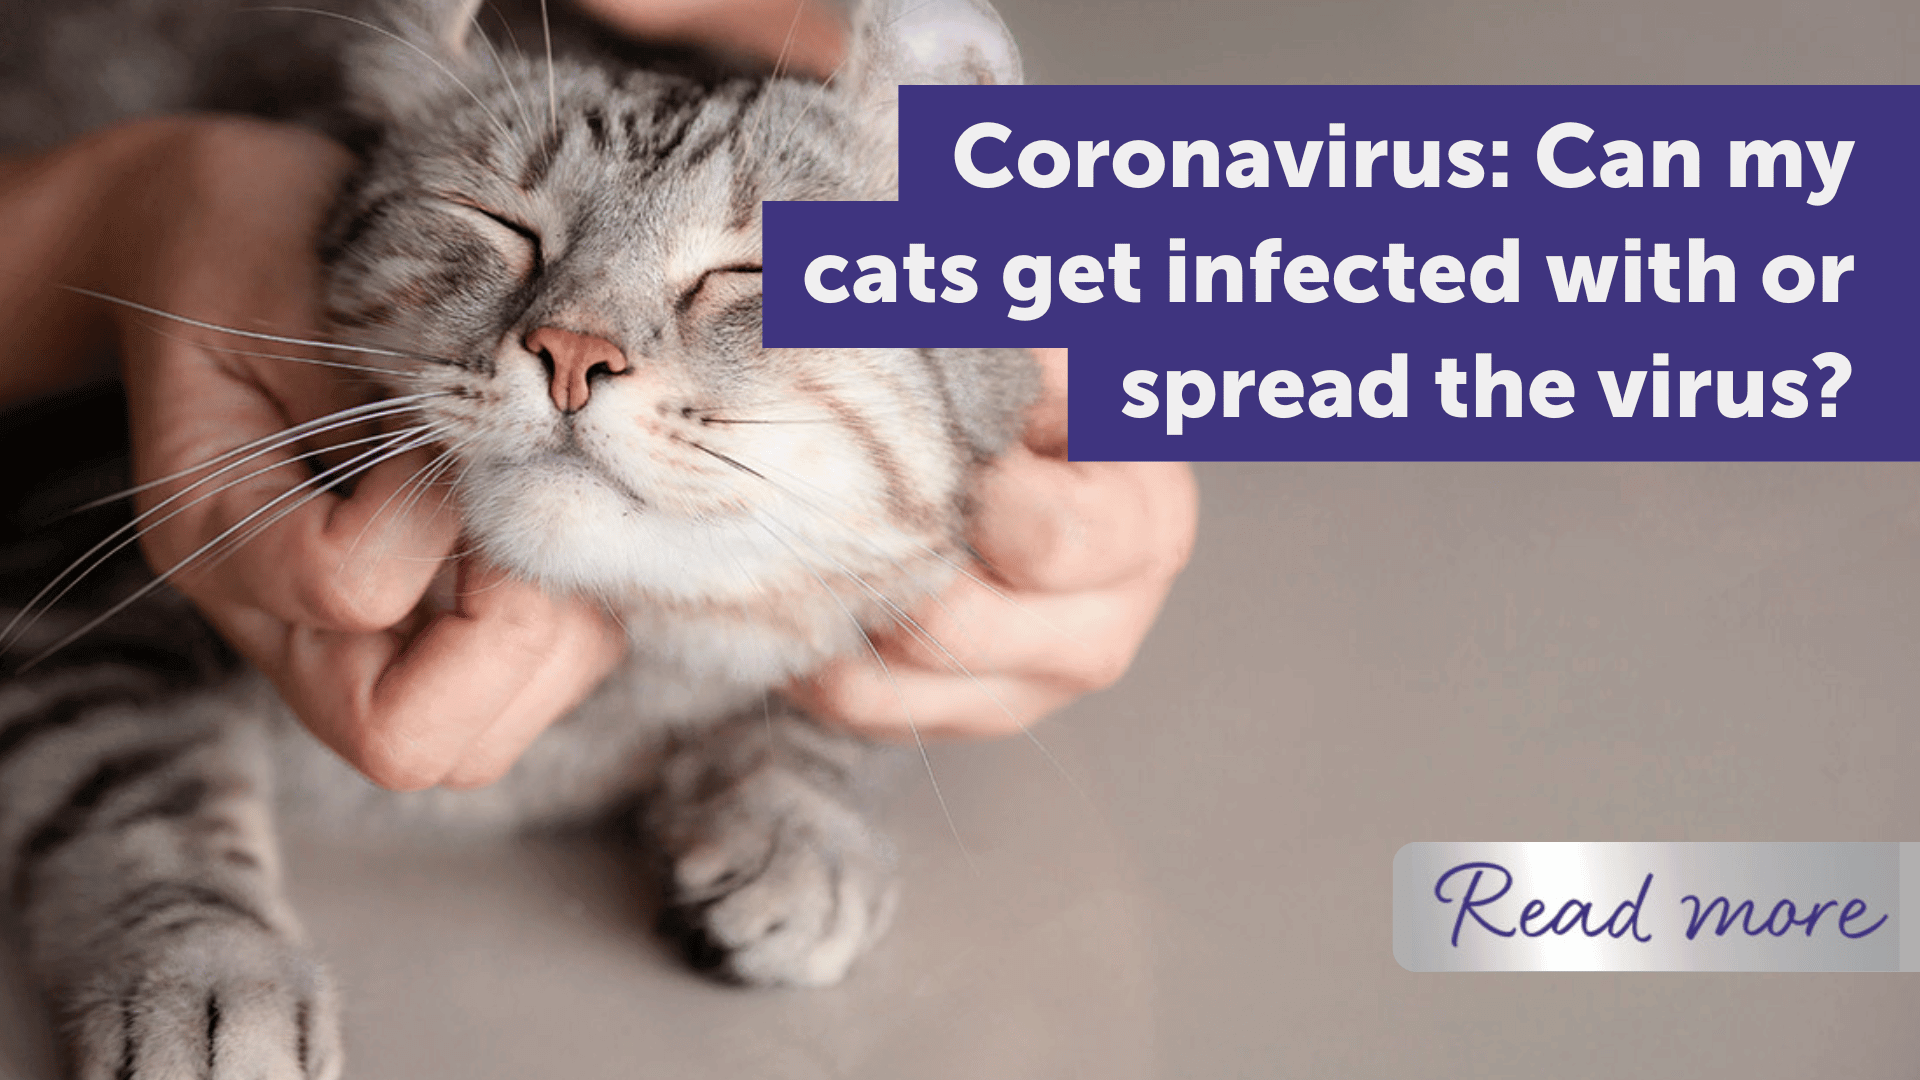 Coronavirus: Can my cats get infected with or spread the virus?